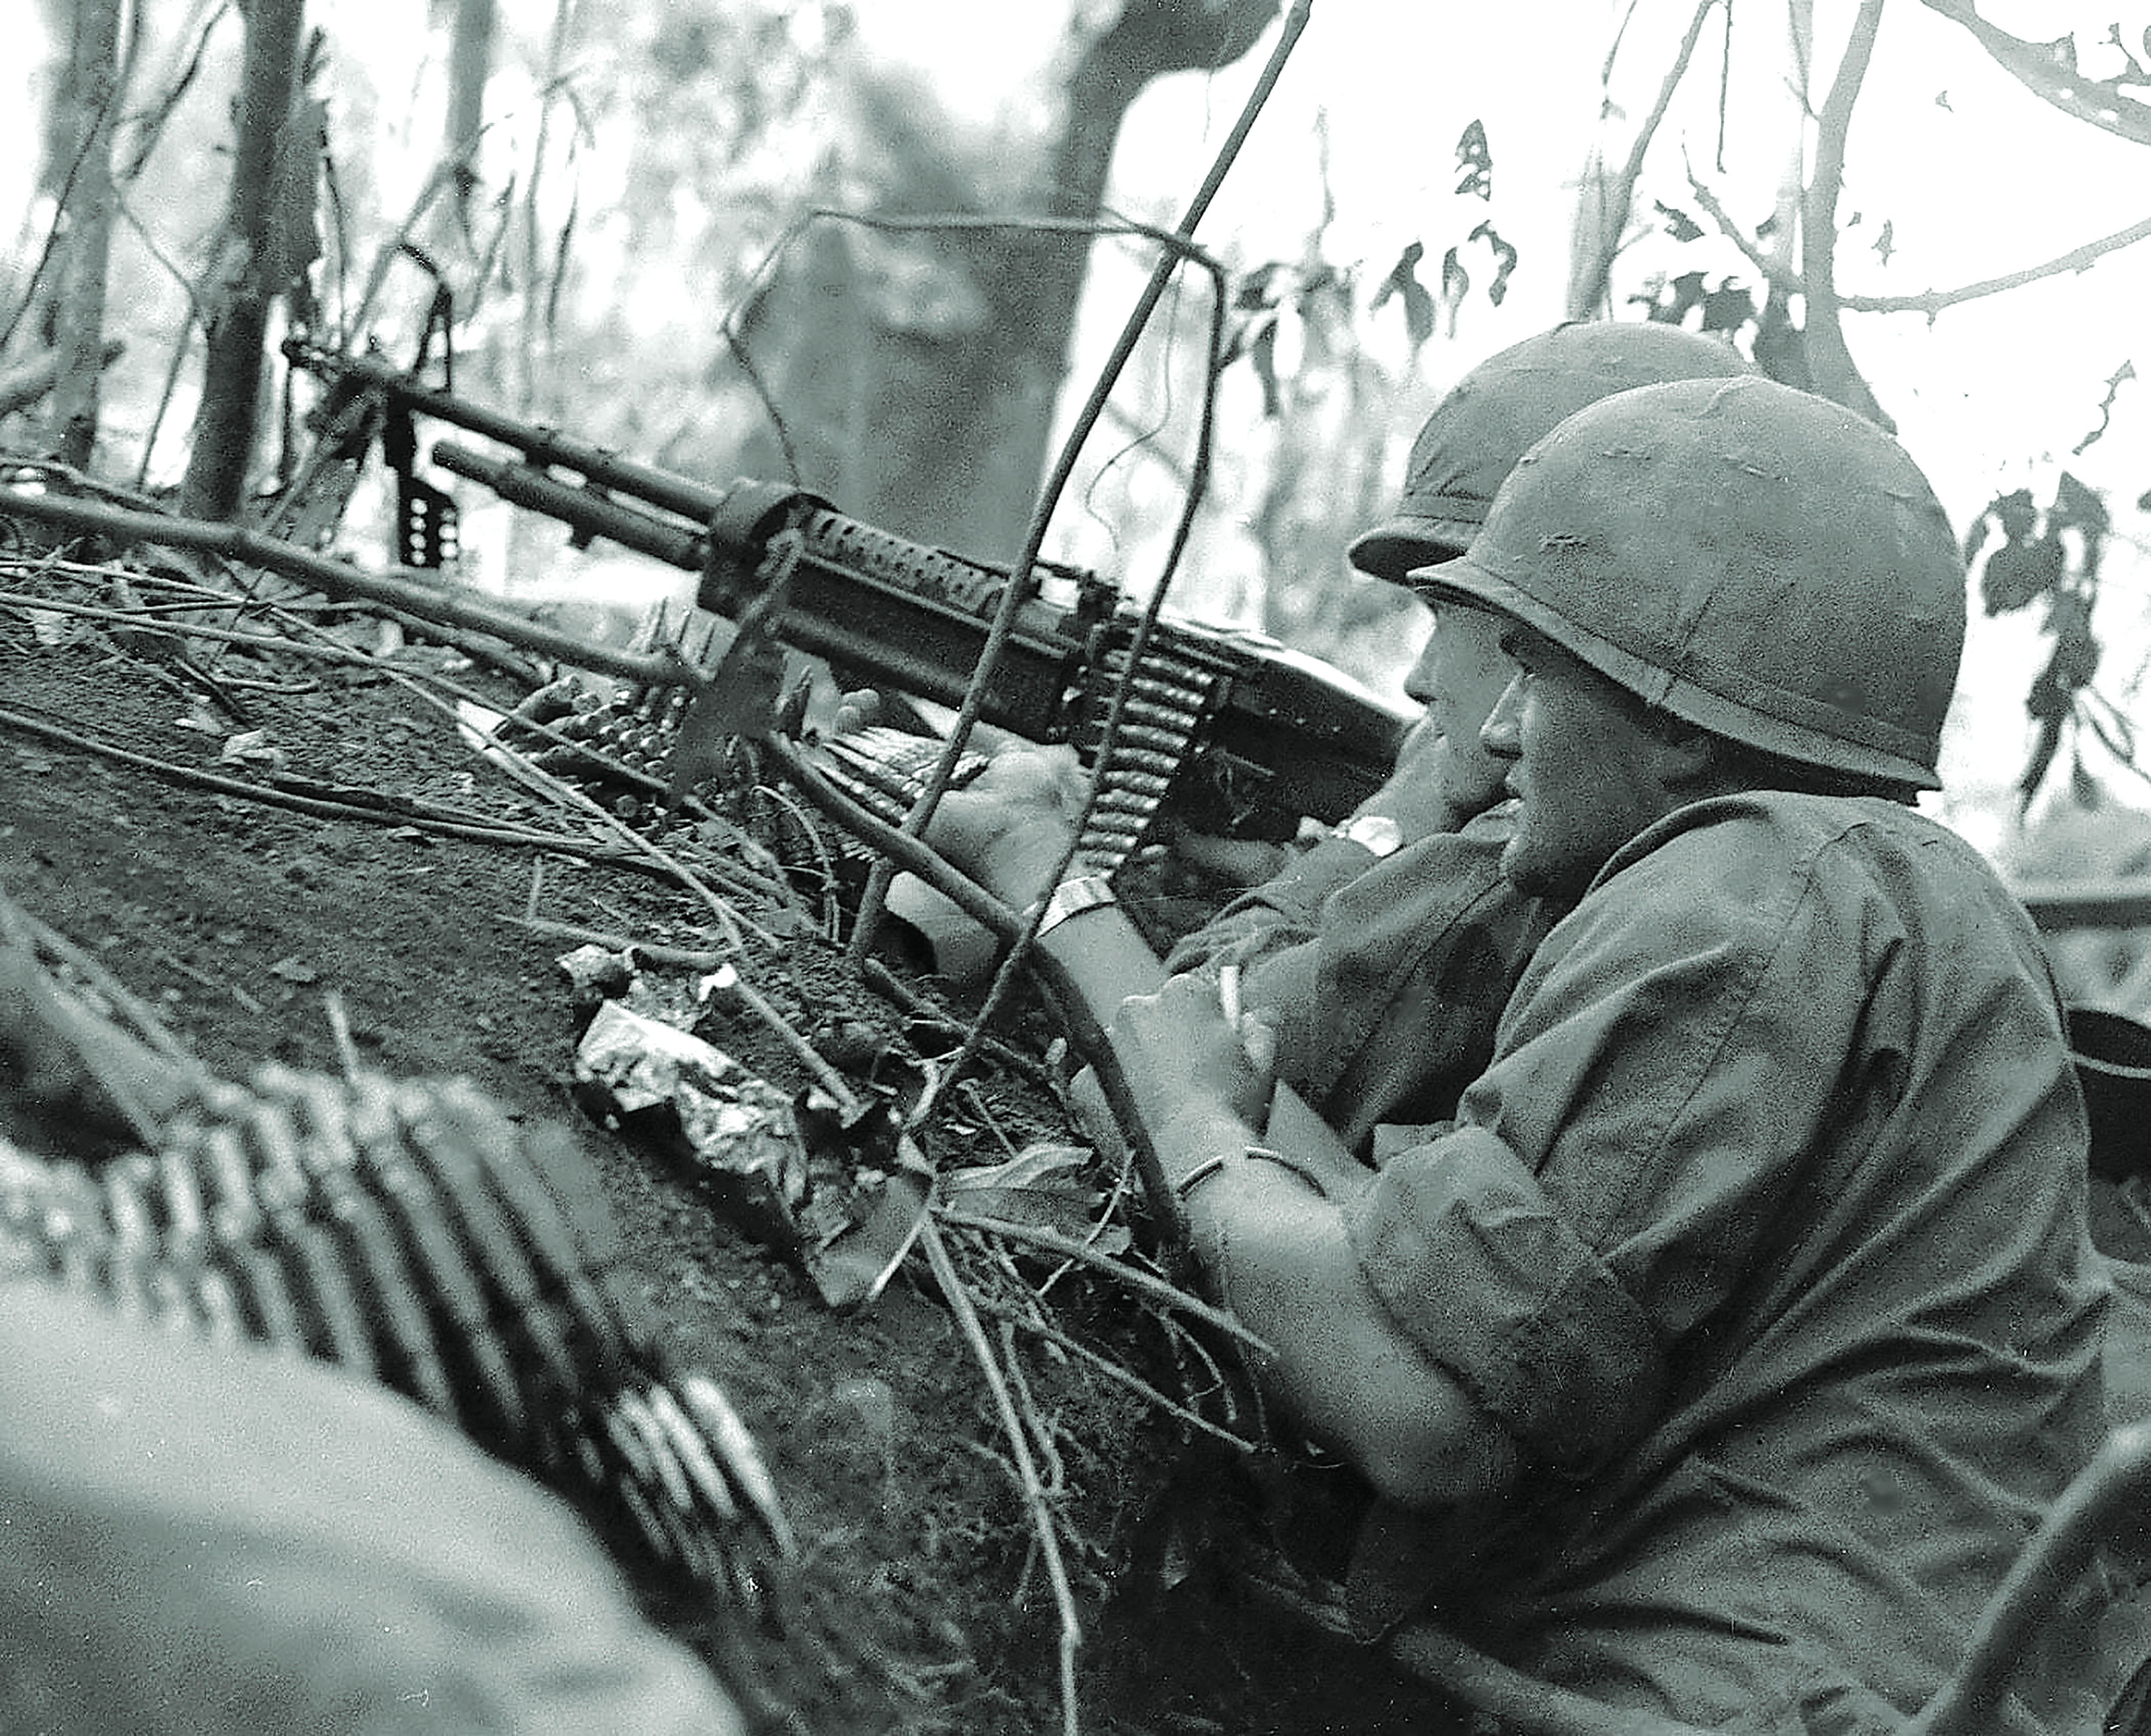 U.S. soldiers nestled in dense jungle foliage provide covering fire with an M60 machine gun in 1966. Machine gunners were often in positions exposed to enemy fire and had short life expectancies after the first shot in a firefight was fired. / Alamy